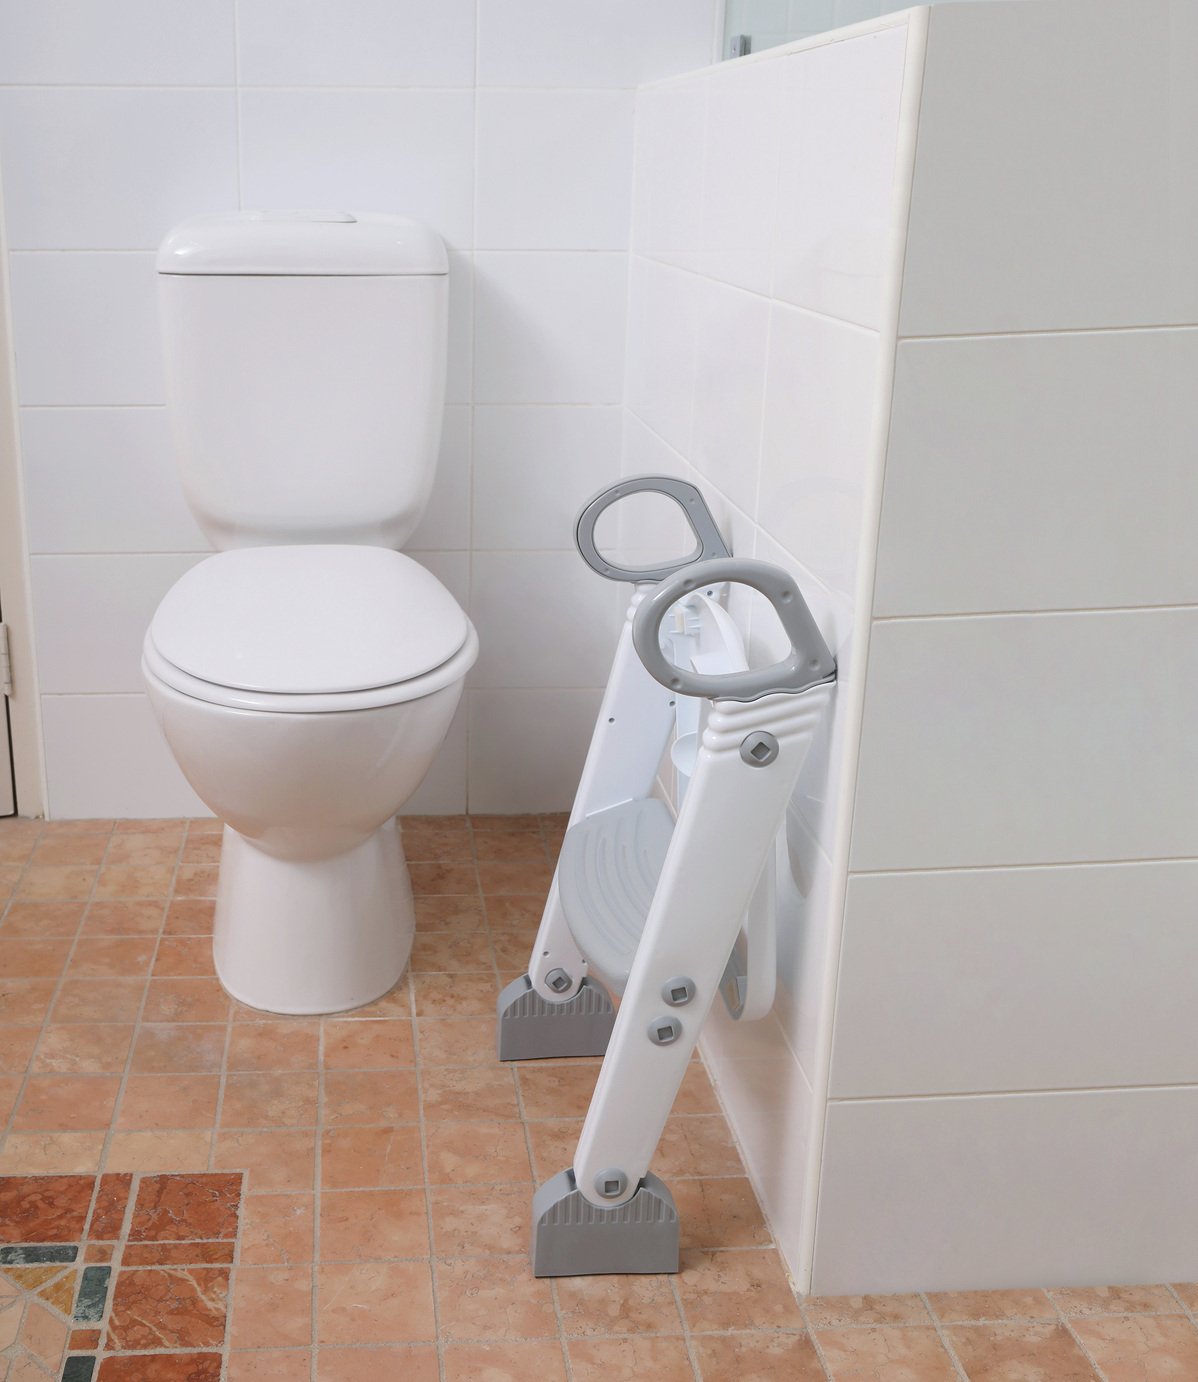 Dreambaby Step-Up Toilet Trainer Review